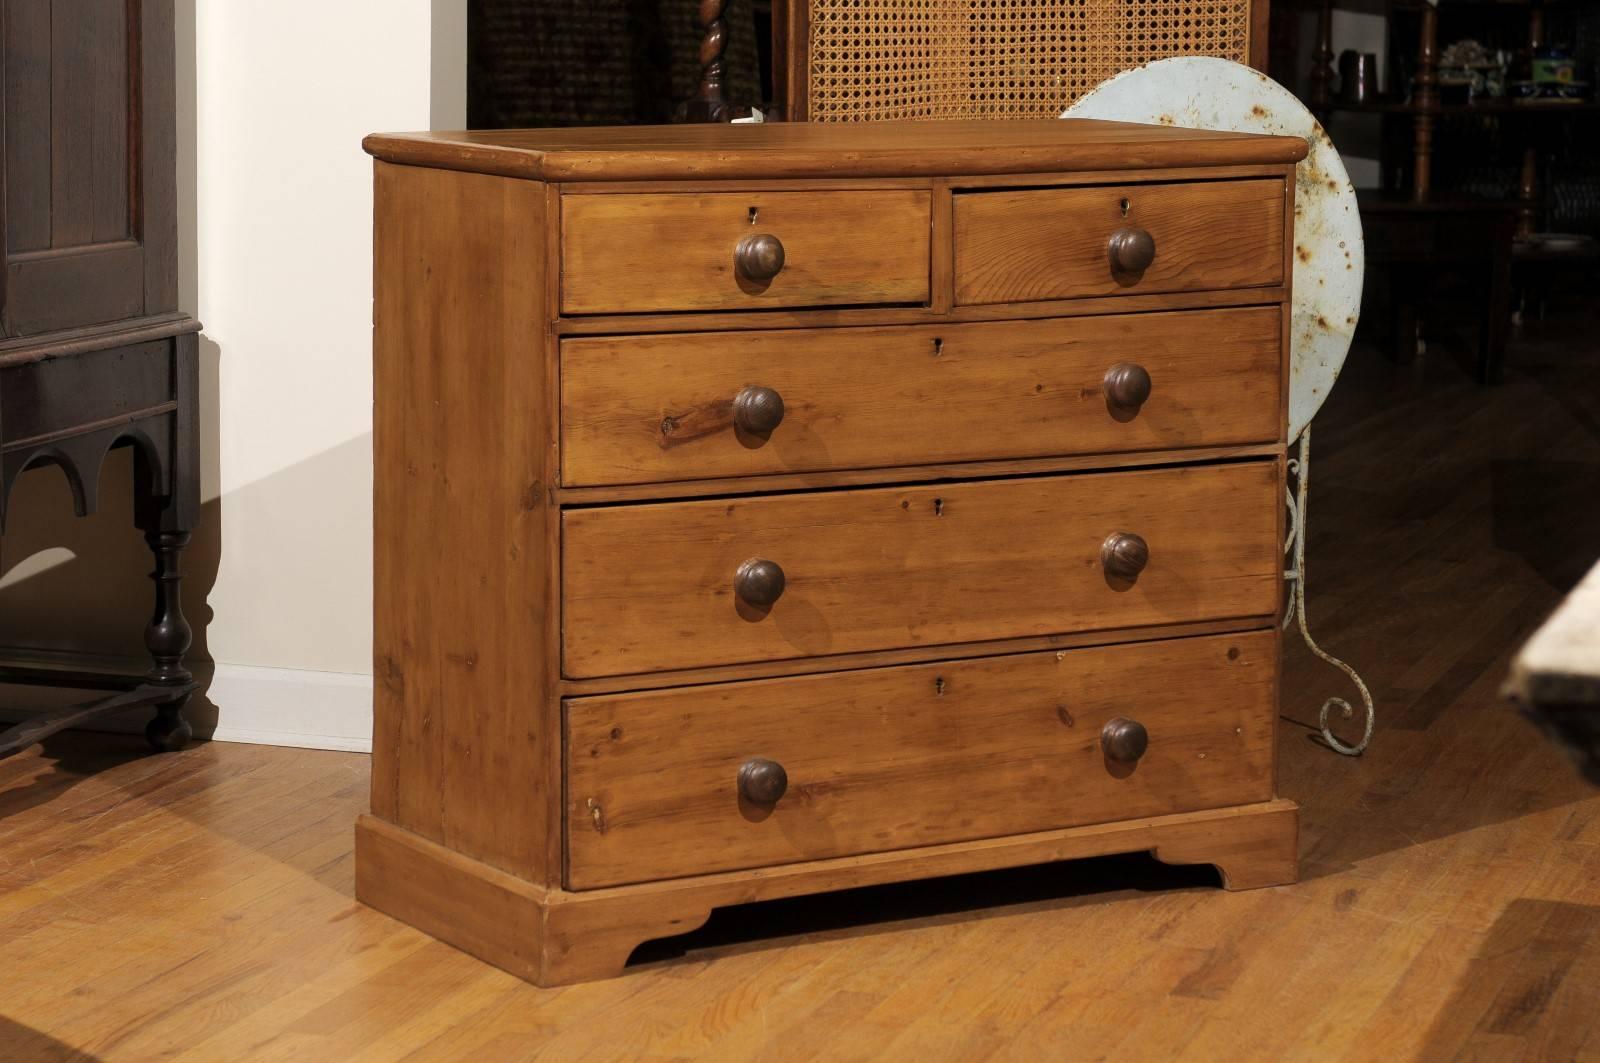 This is a wonderful pine chest made in England. It is two drawers over three which is the most desirable.